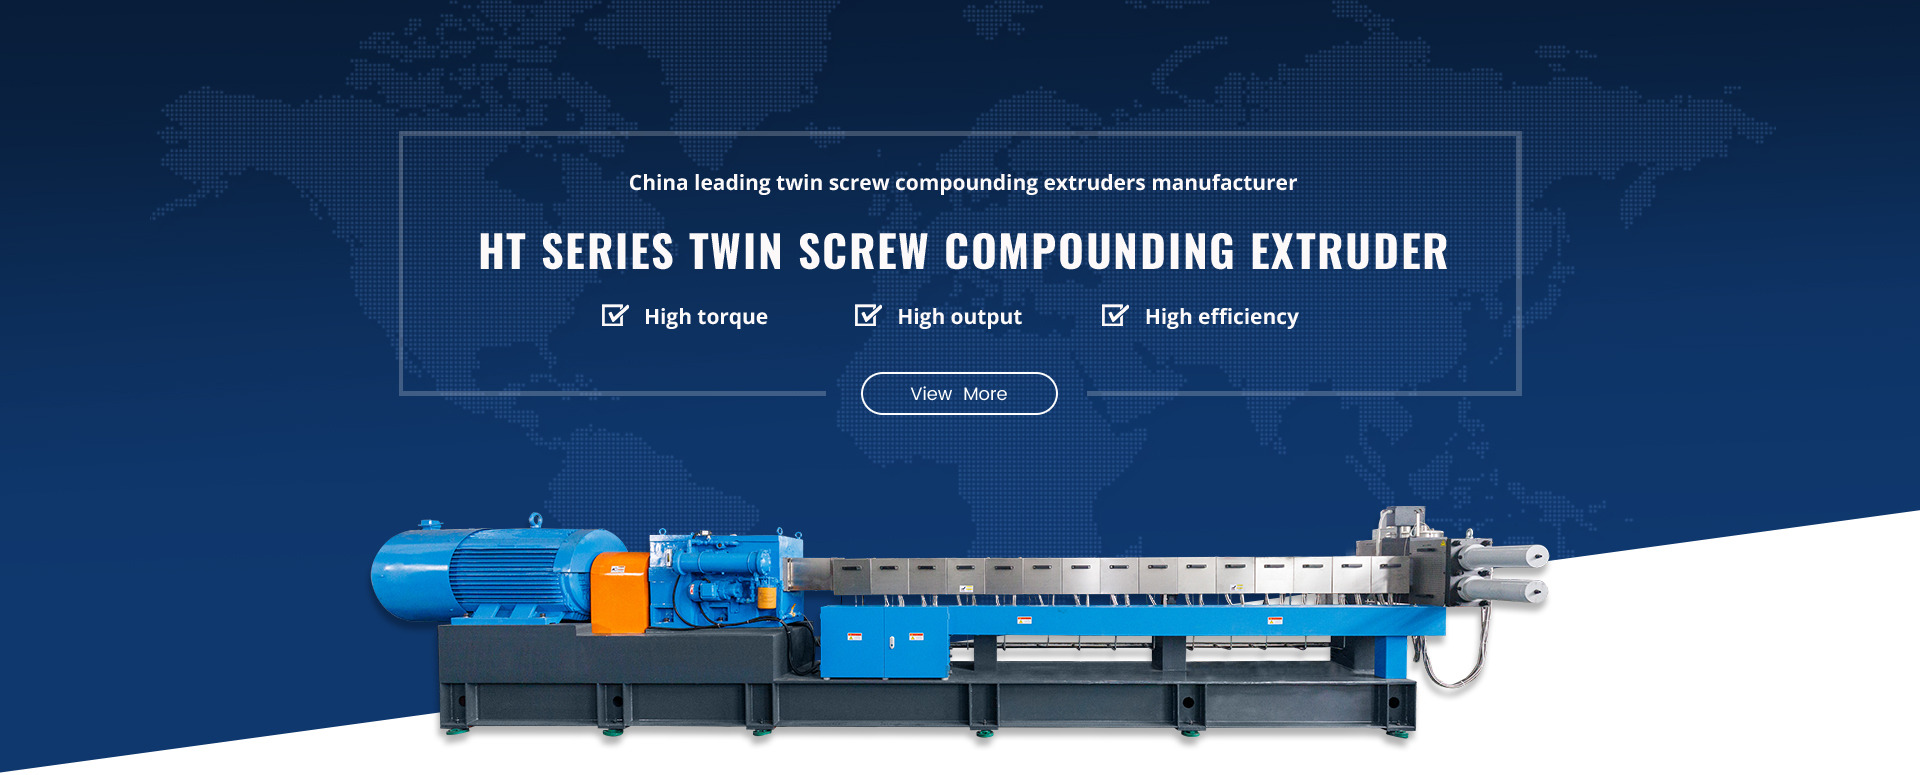 Equipment function of twin screw compounding extruder